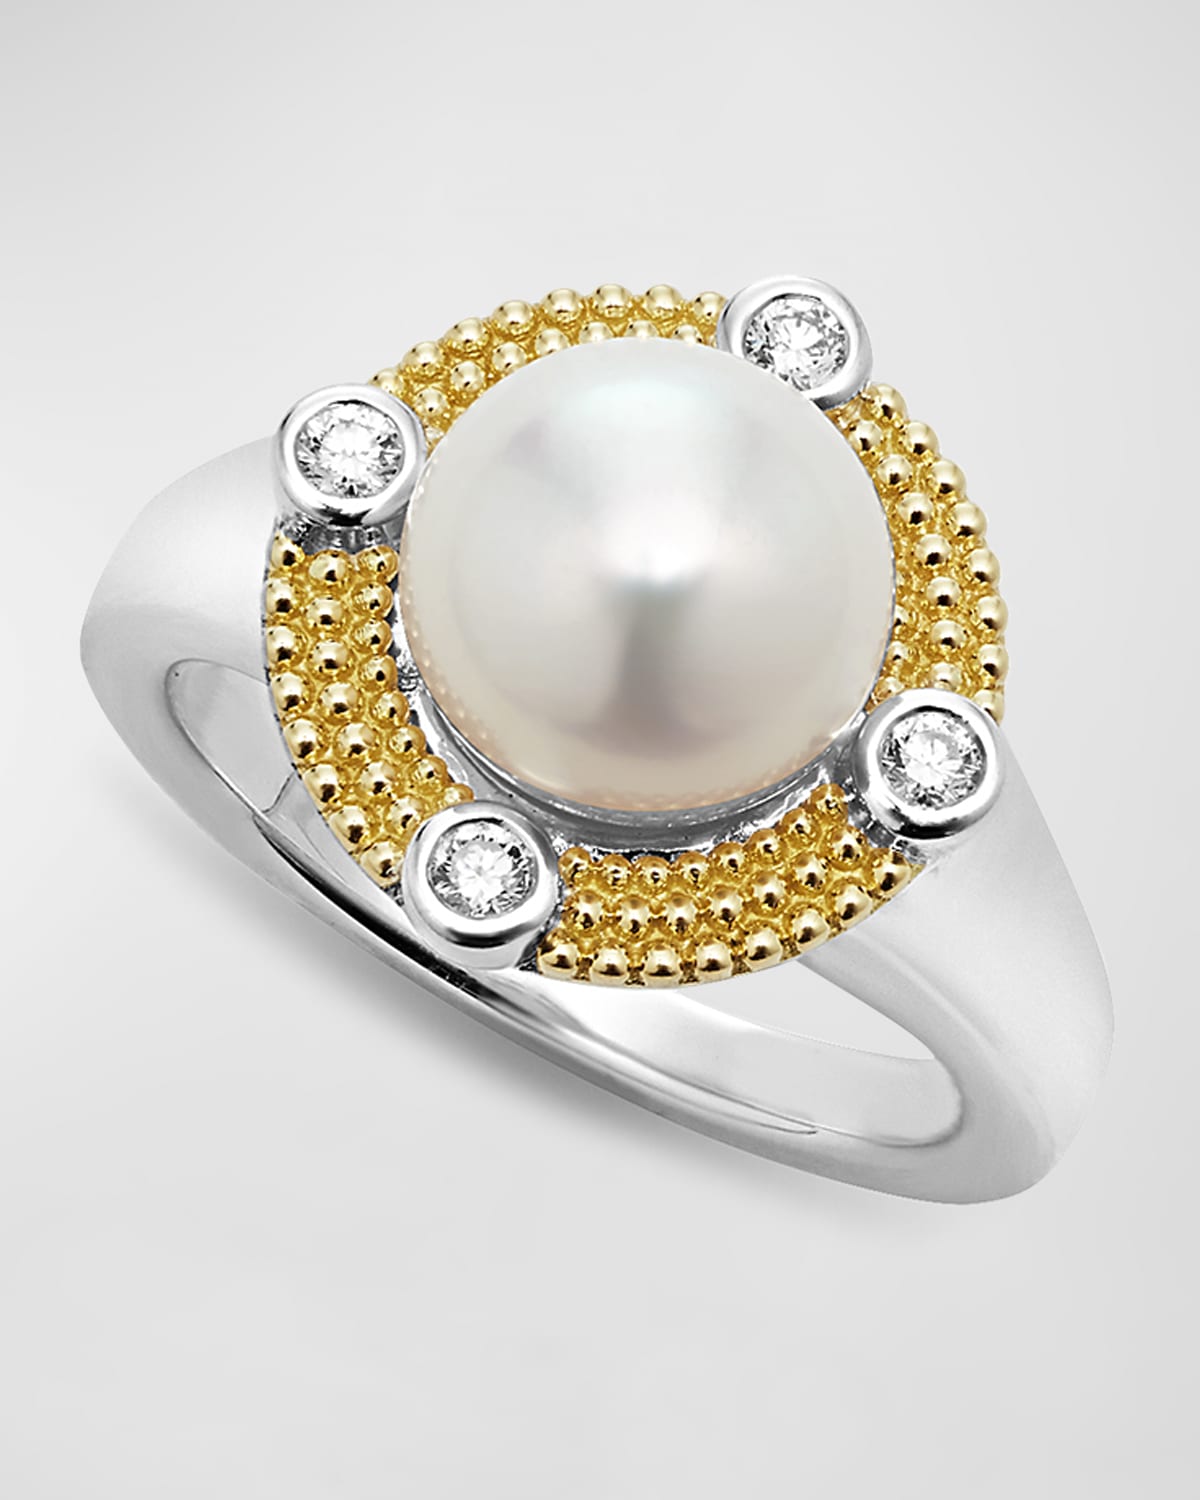 LAGOS STERLING SILVER AND 18K LUNA PEARL LUX WITH DIAMOND RING